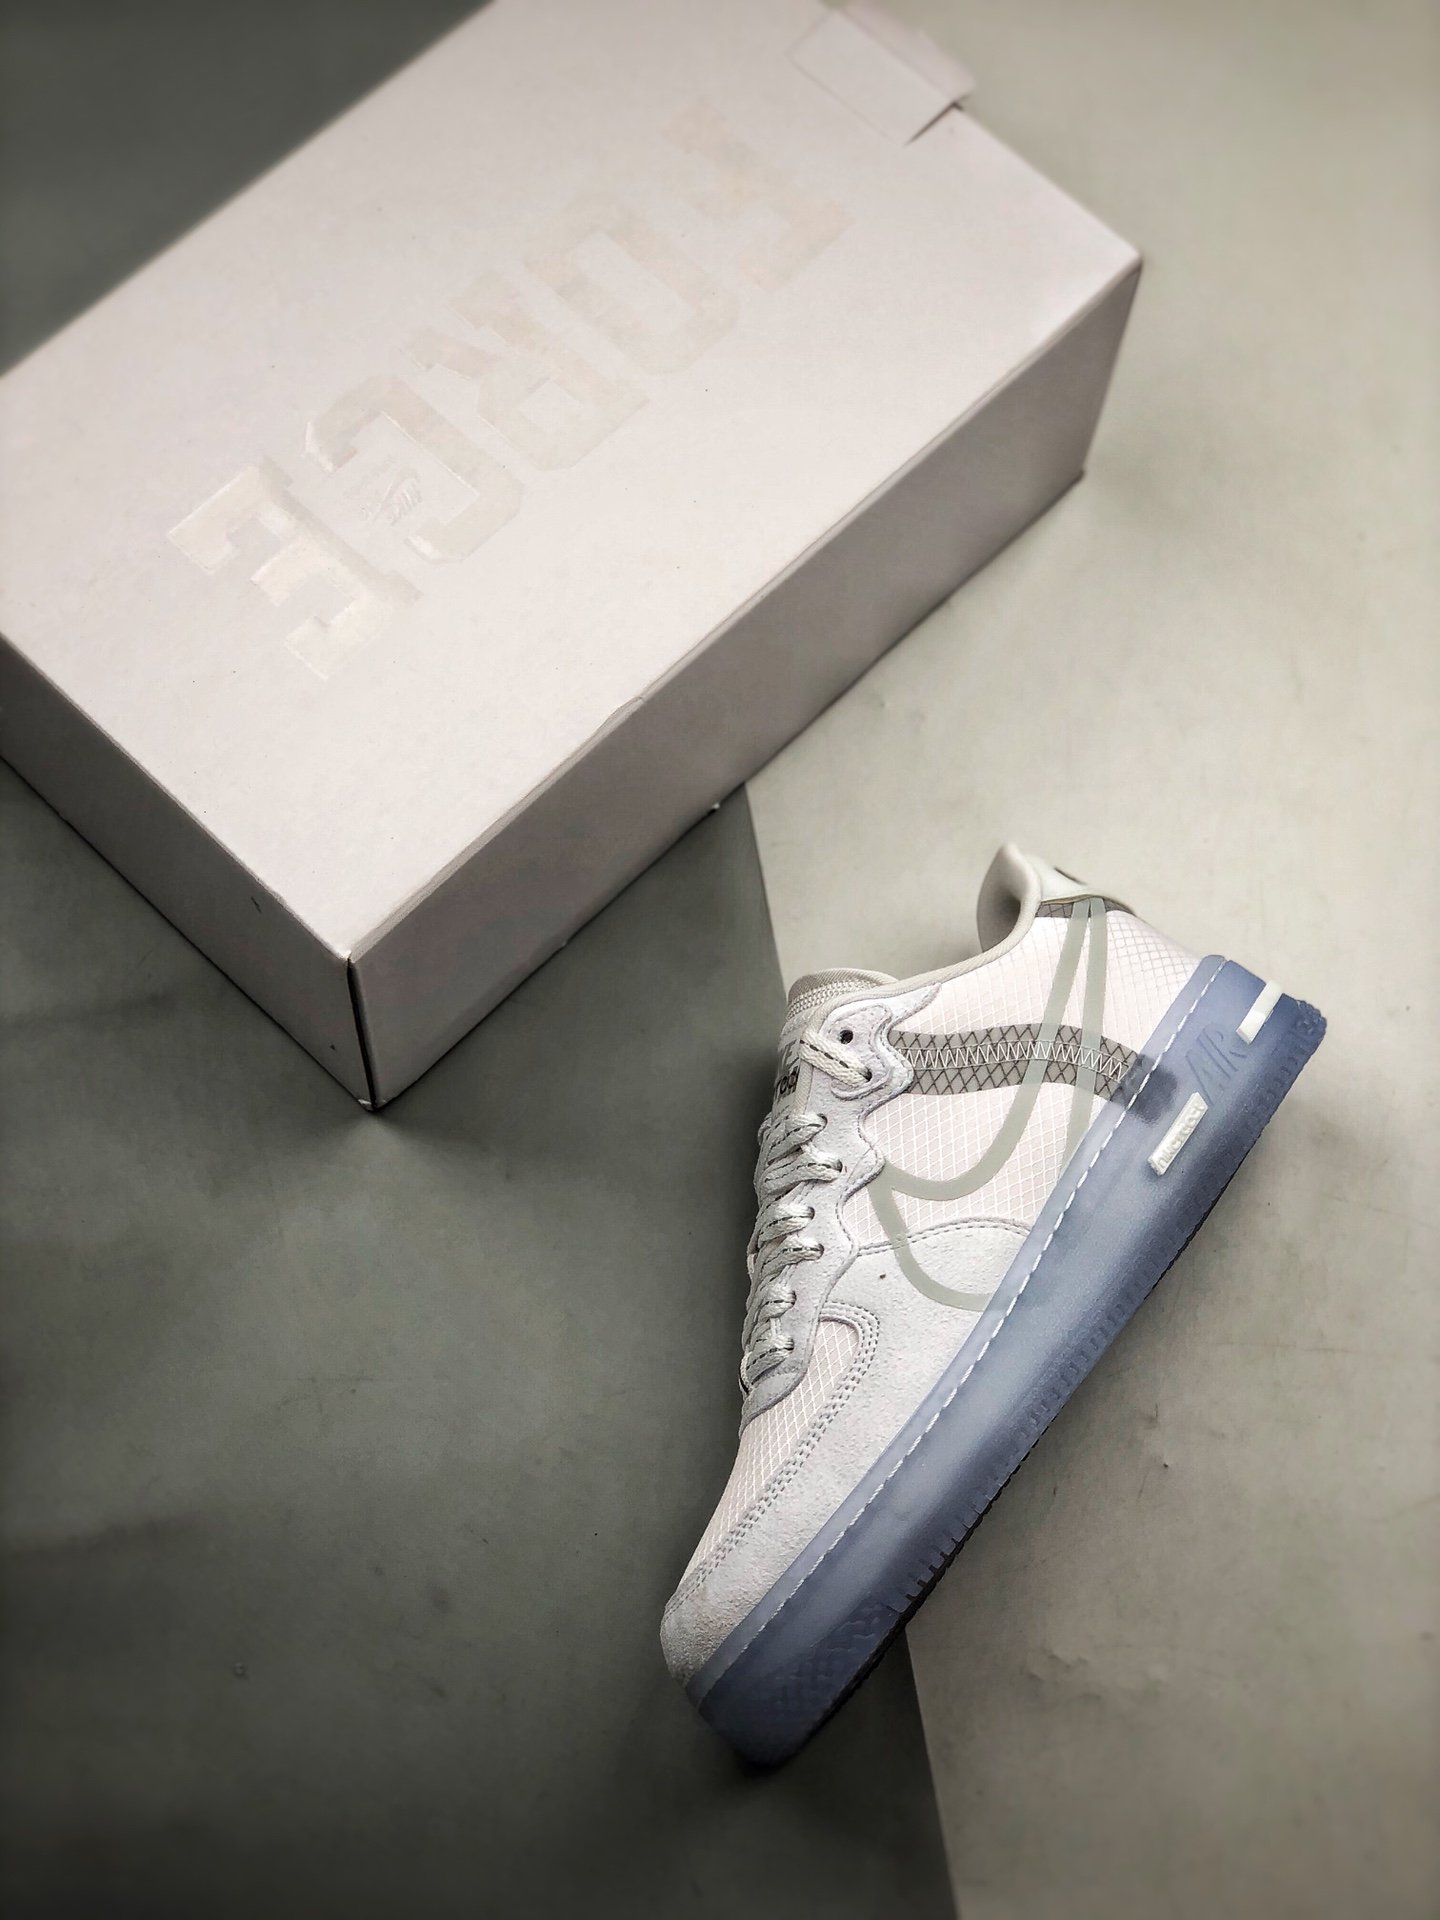 Nike Air Force 1 React “White Ice” CQ8879-100 For Sale – Sneaker Hello